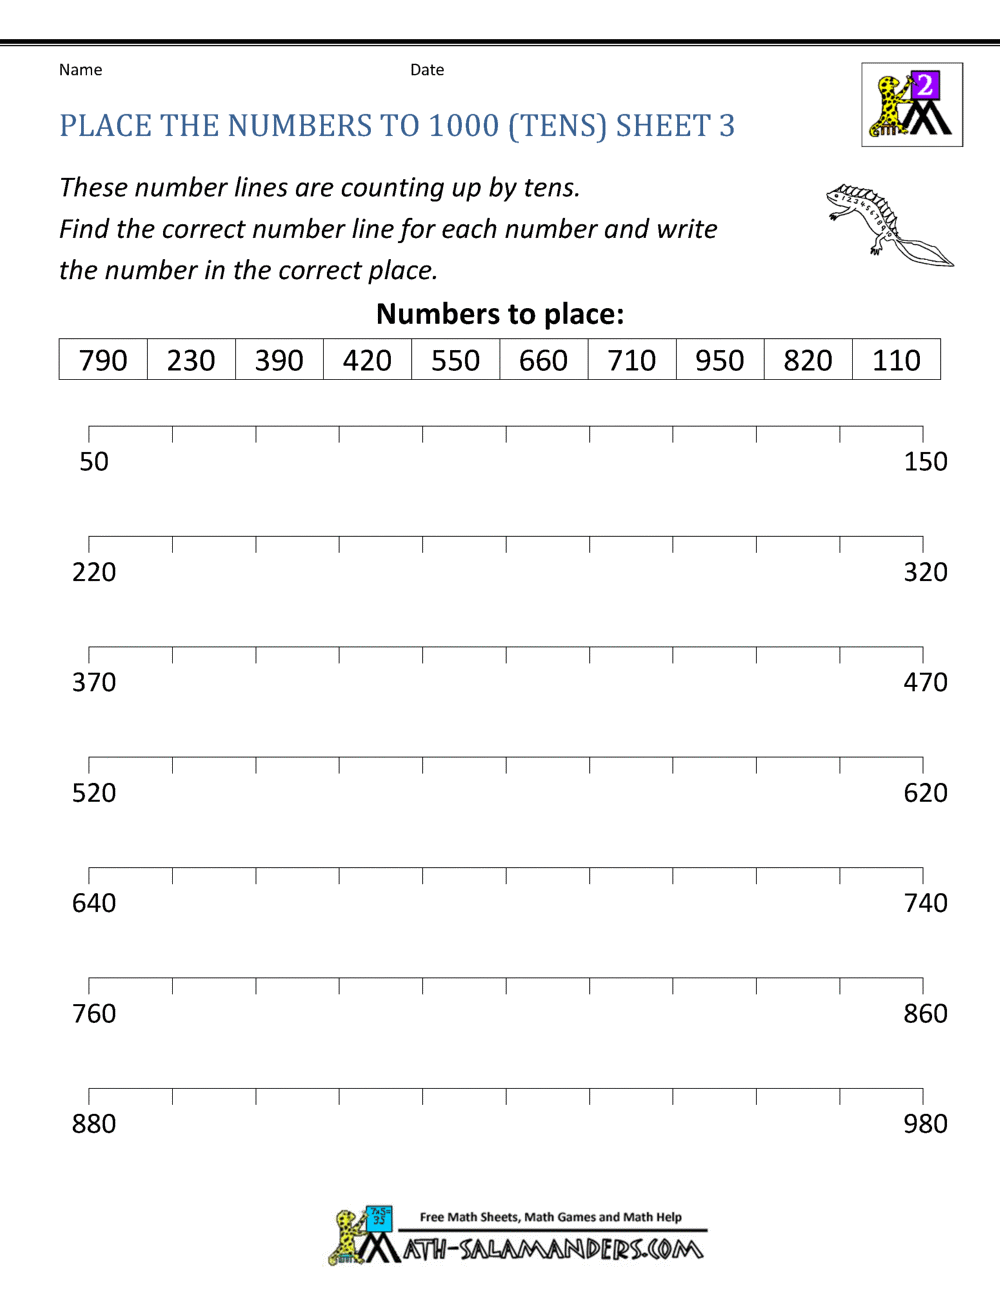 Free Number Line Worksheets - Counting by tens